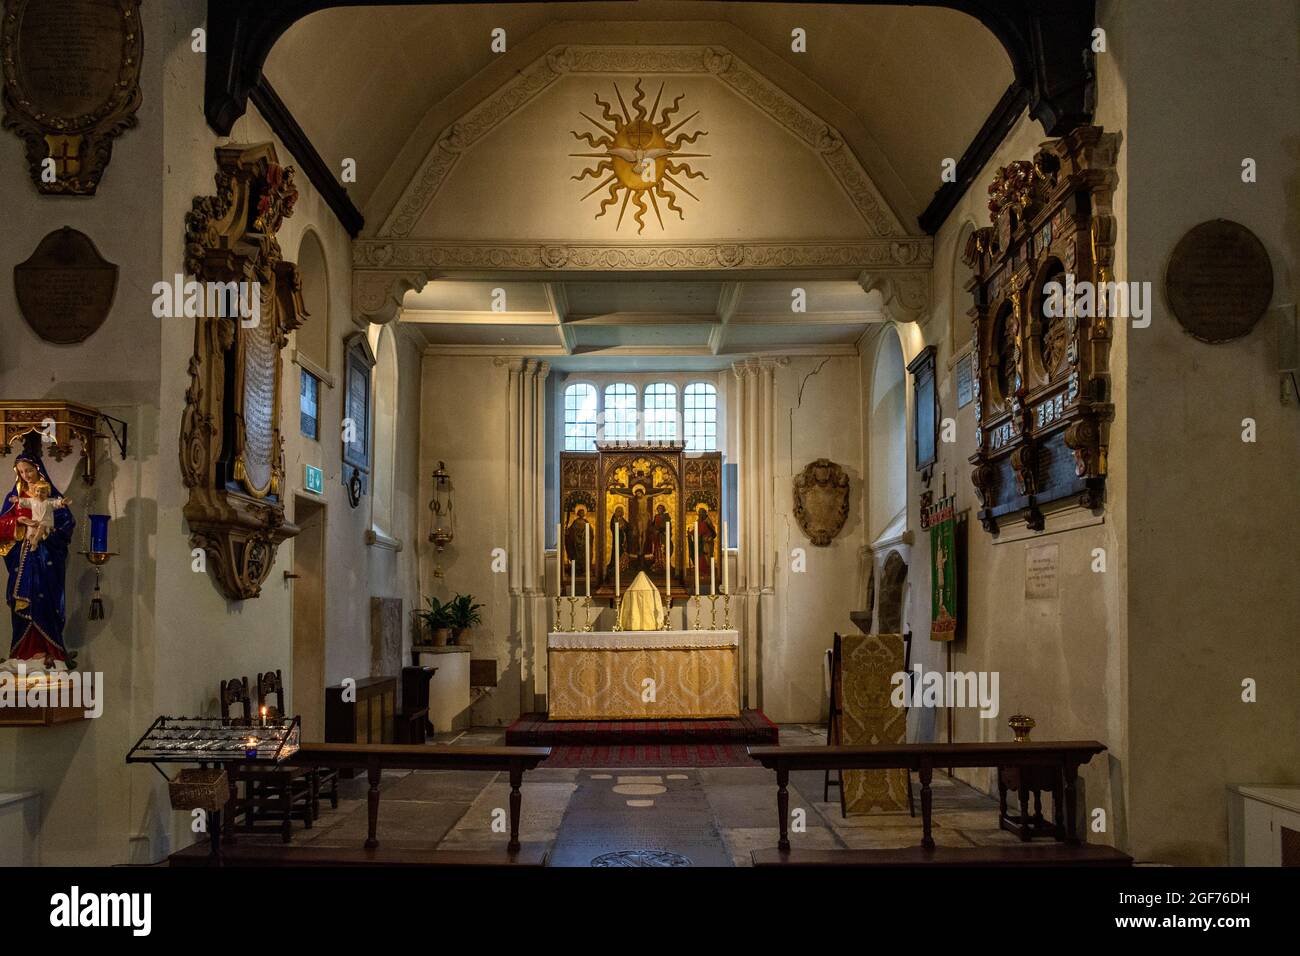 LONDON SOMERS TOWN SAINT PANCRAS OLD CHURCH THE INTERIOR AND ALTAR Stock Photo